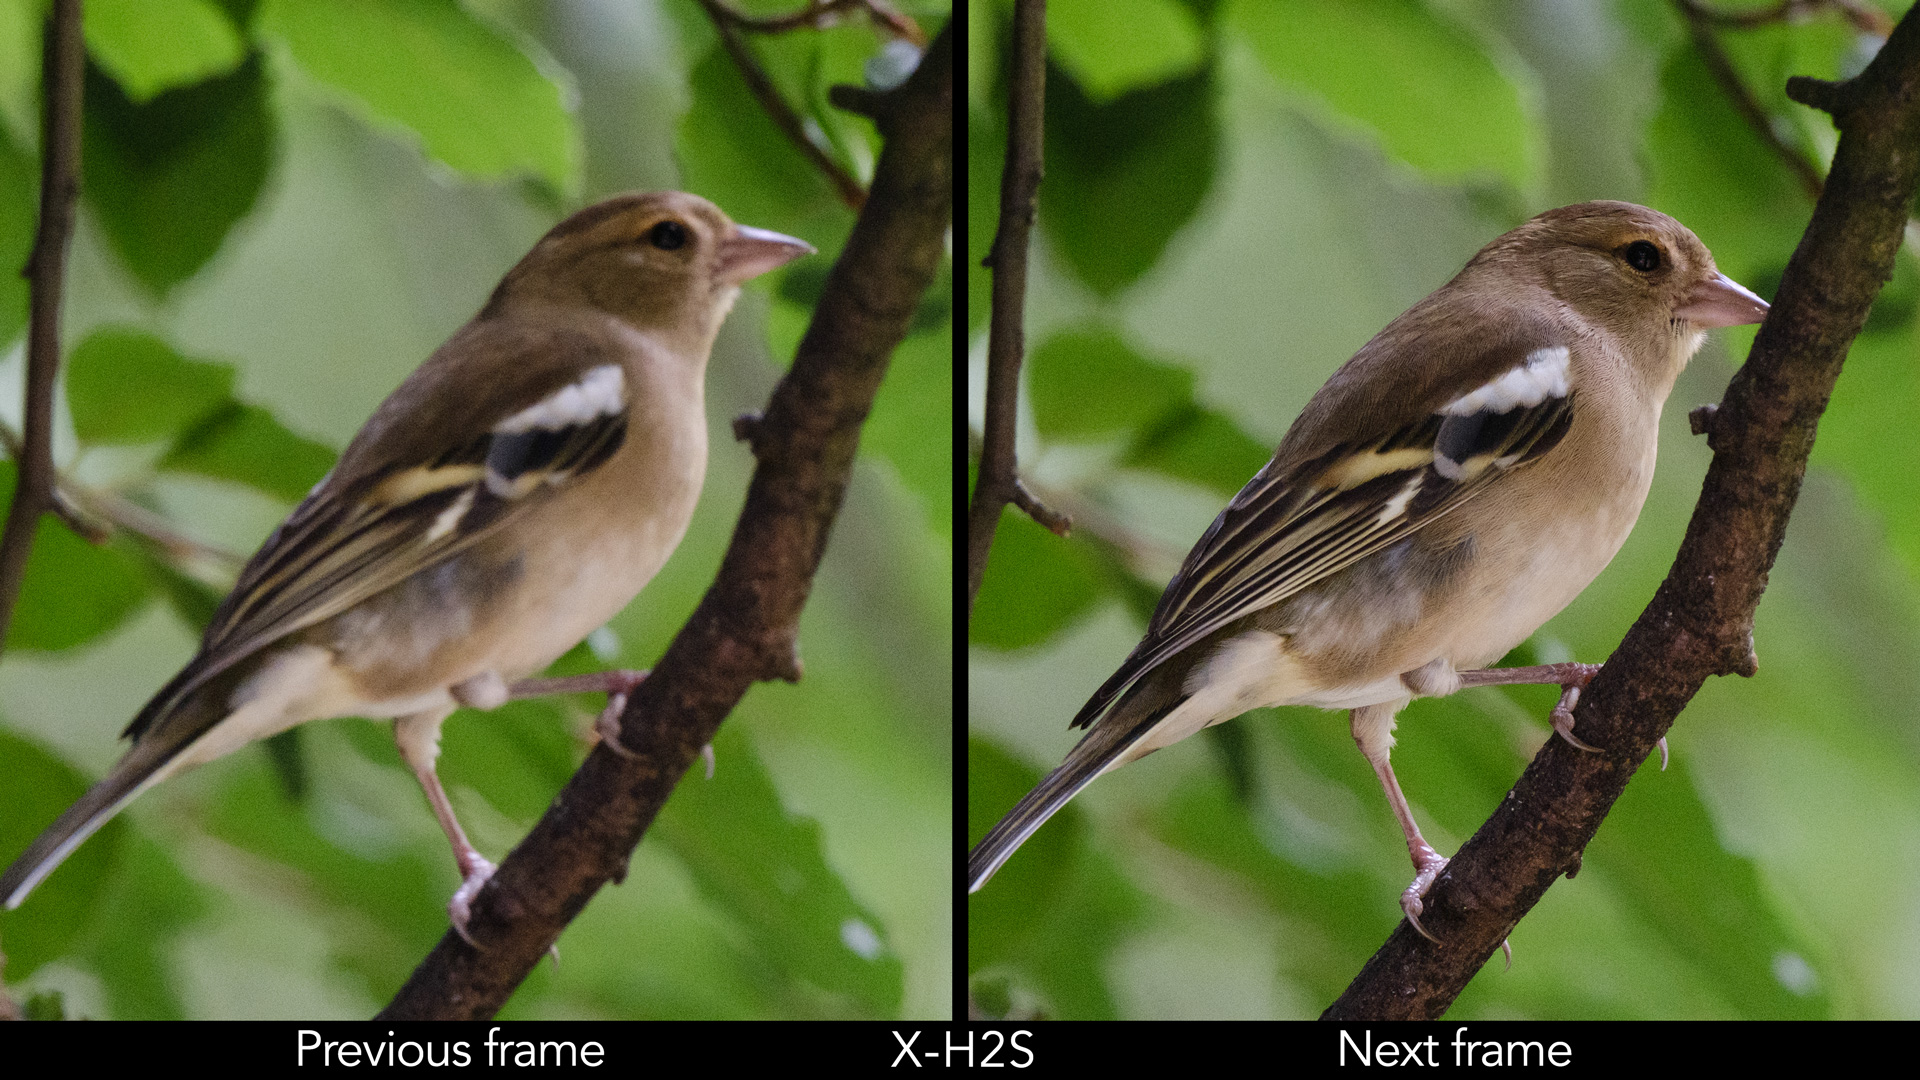 Side by side image of a chaffinch resting perched on a branch, showing one photo out of focus and the next in focus.